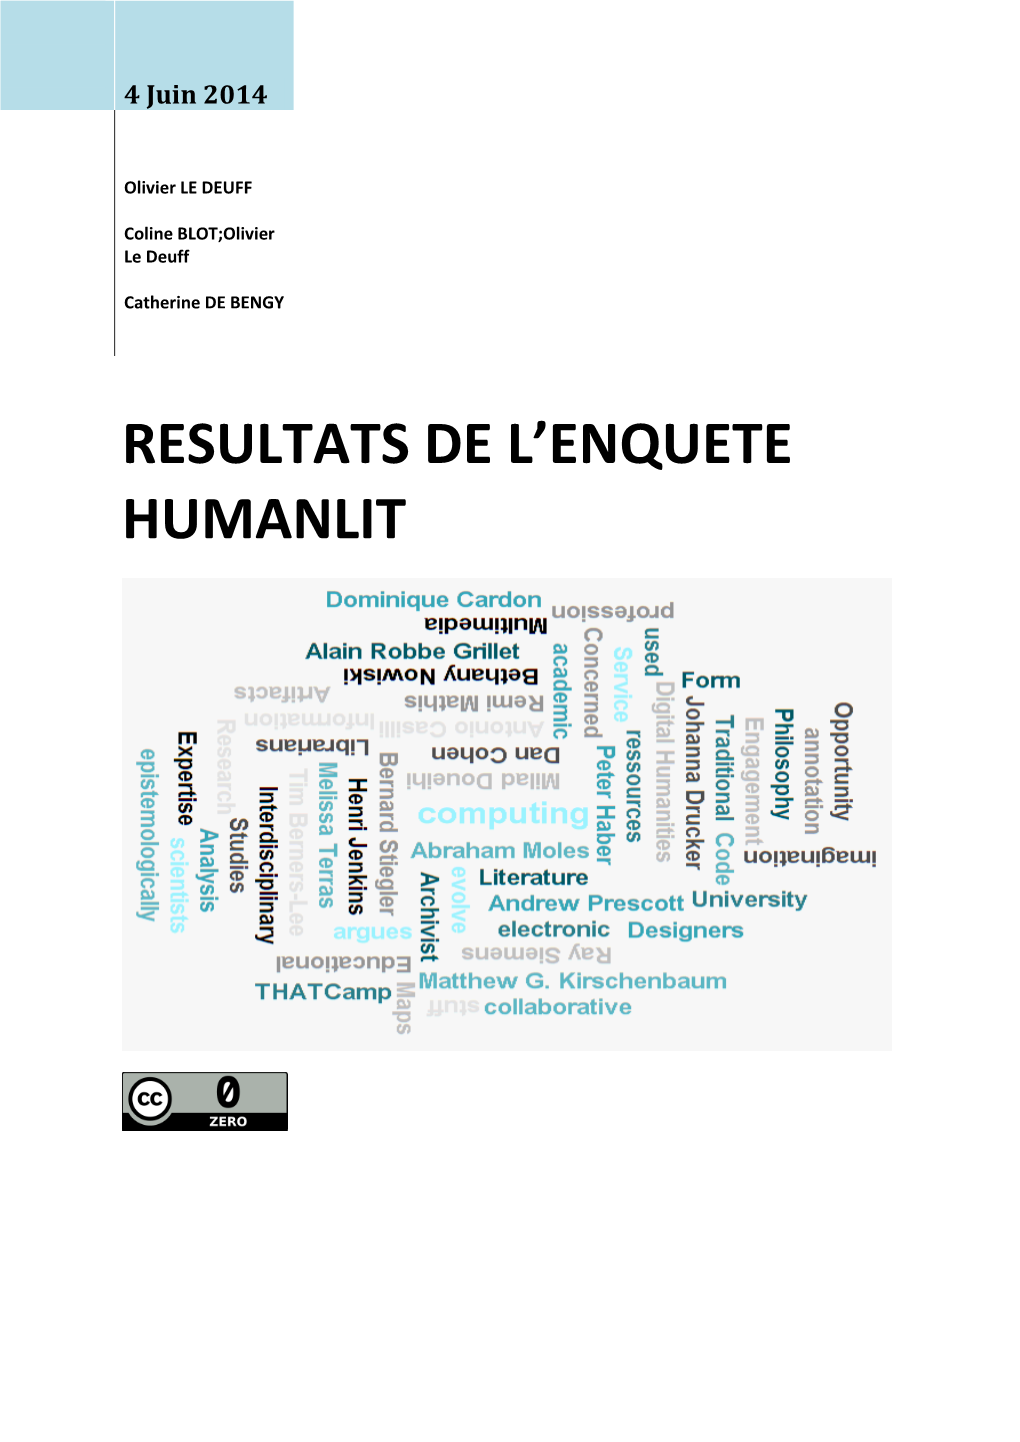 Humanlit Results